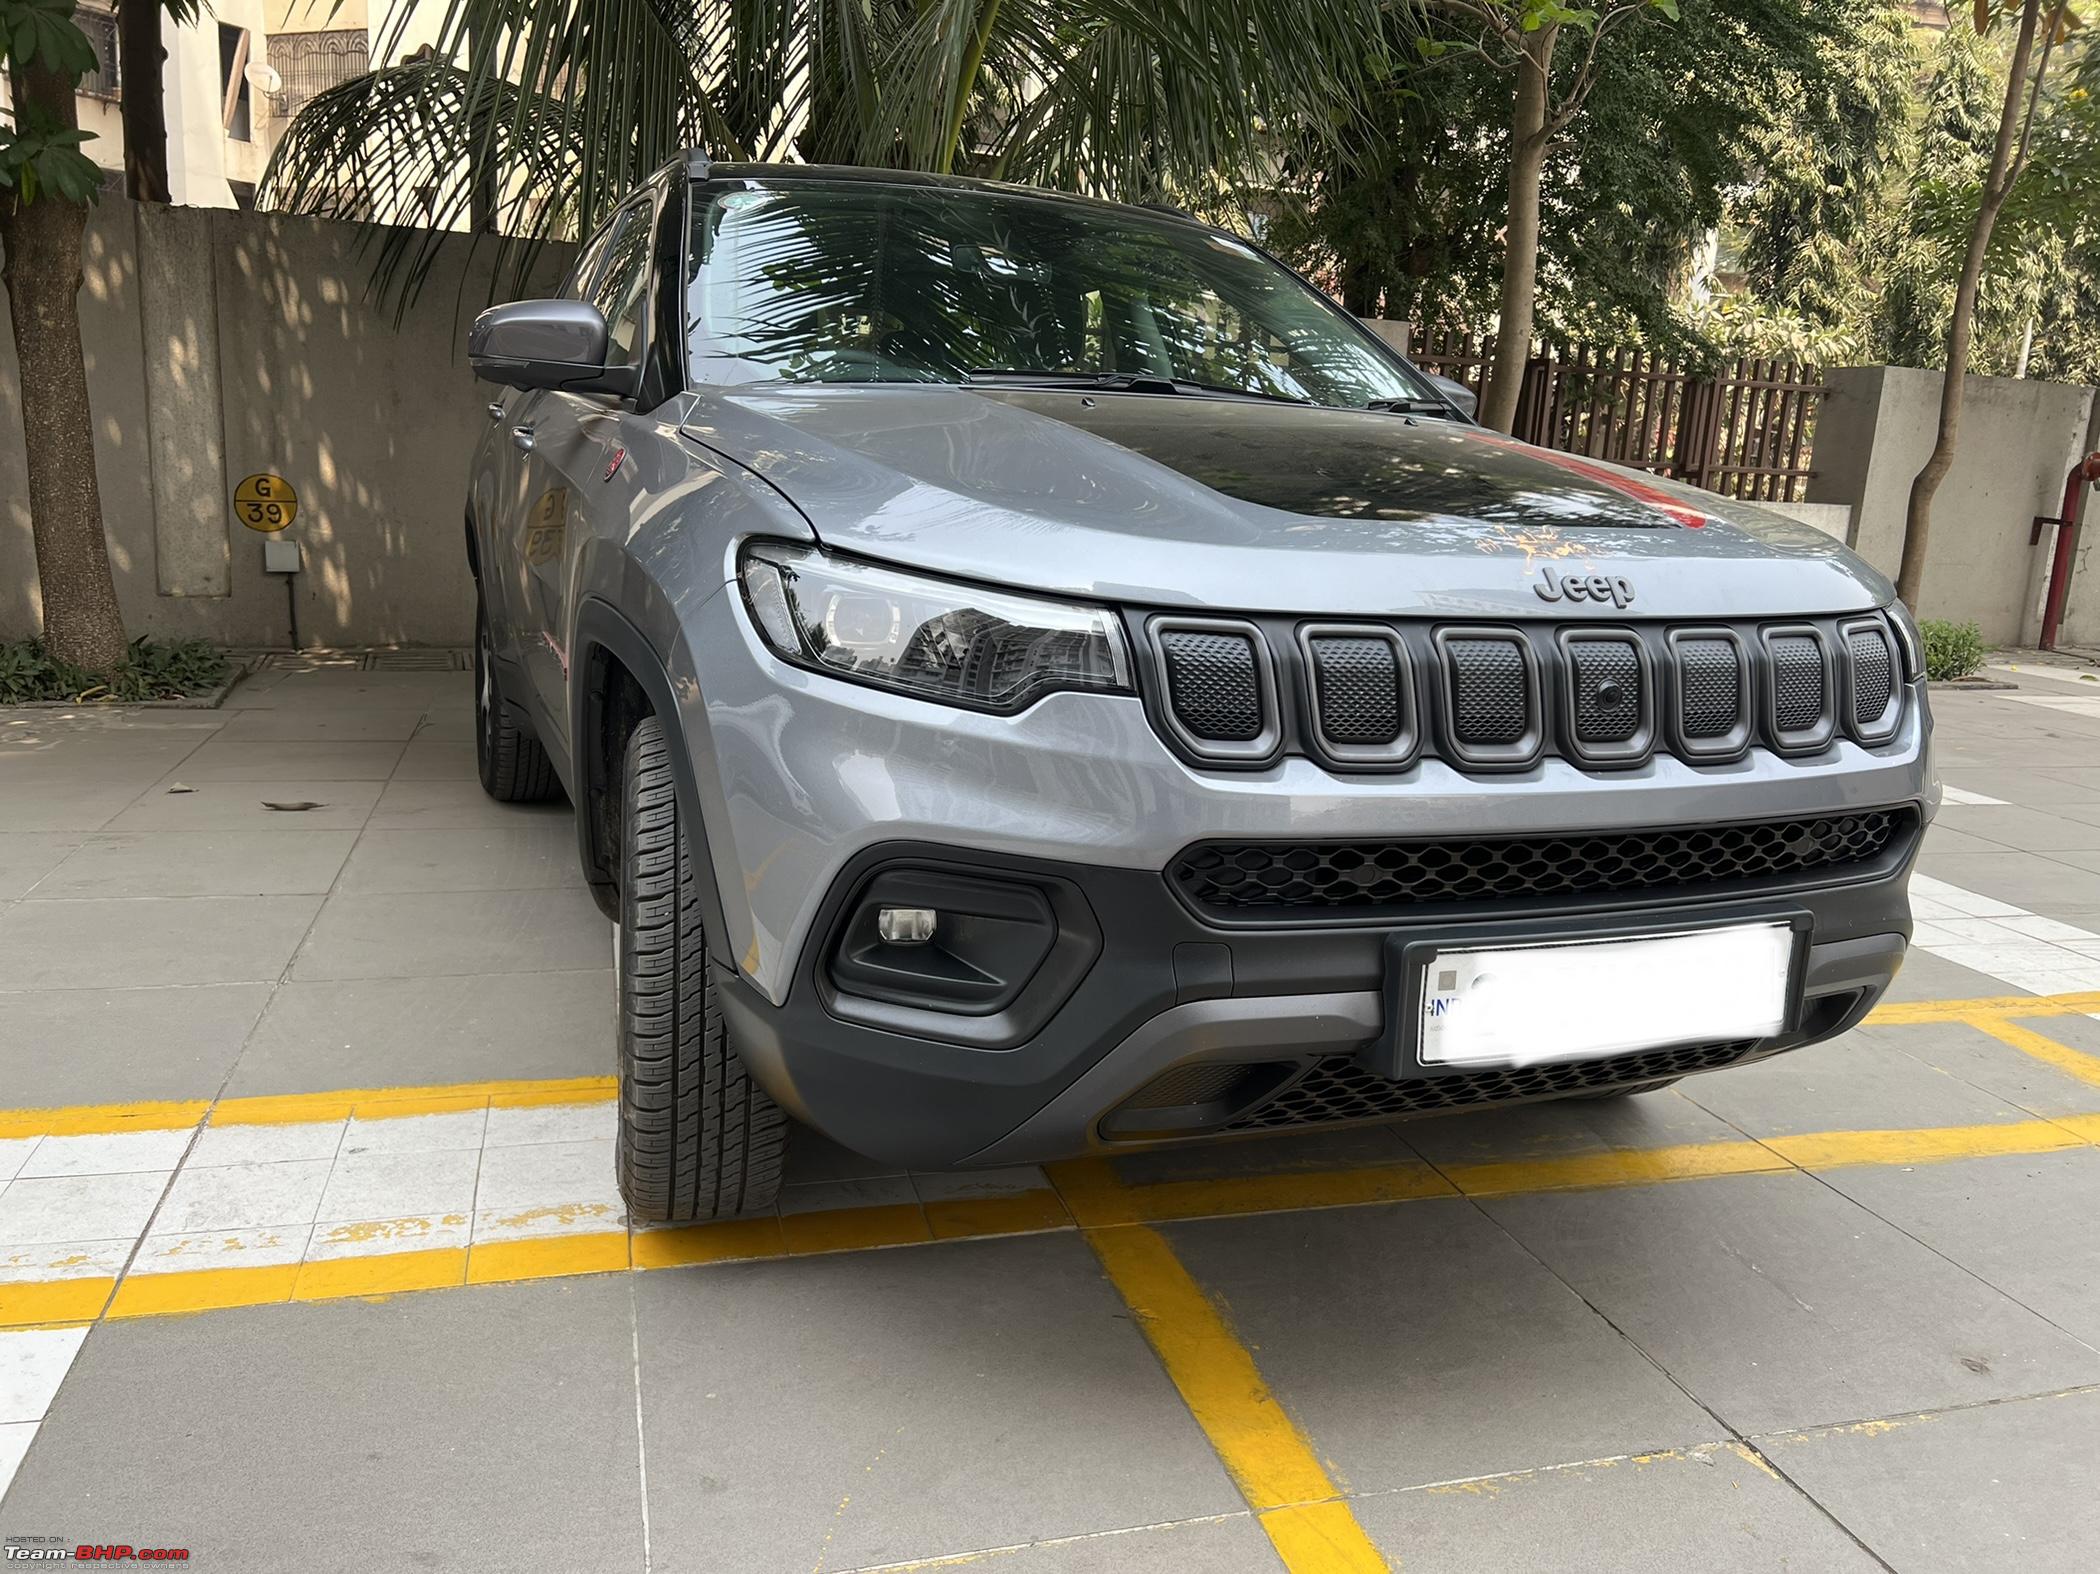 Jeep Compass Trailhawk facelift launch expected in February 2022 - Page 5 -  Team-BHP